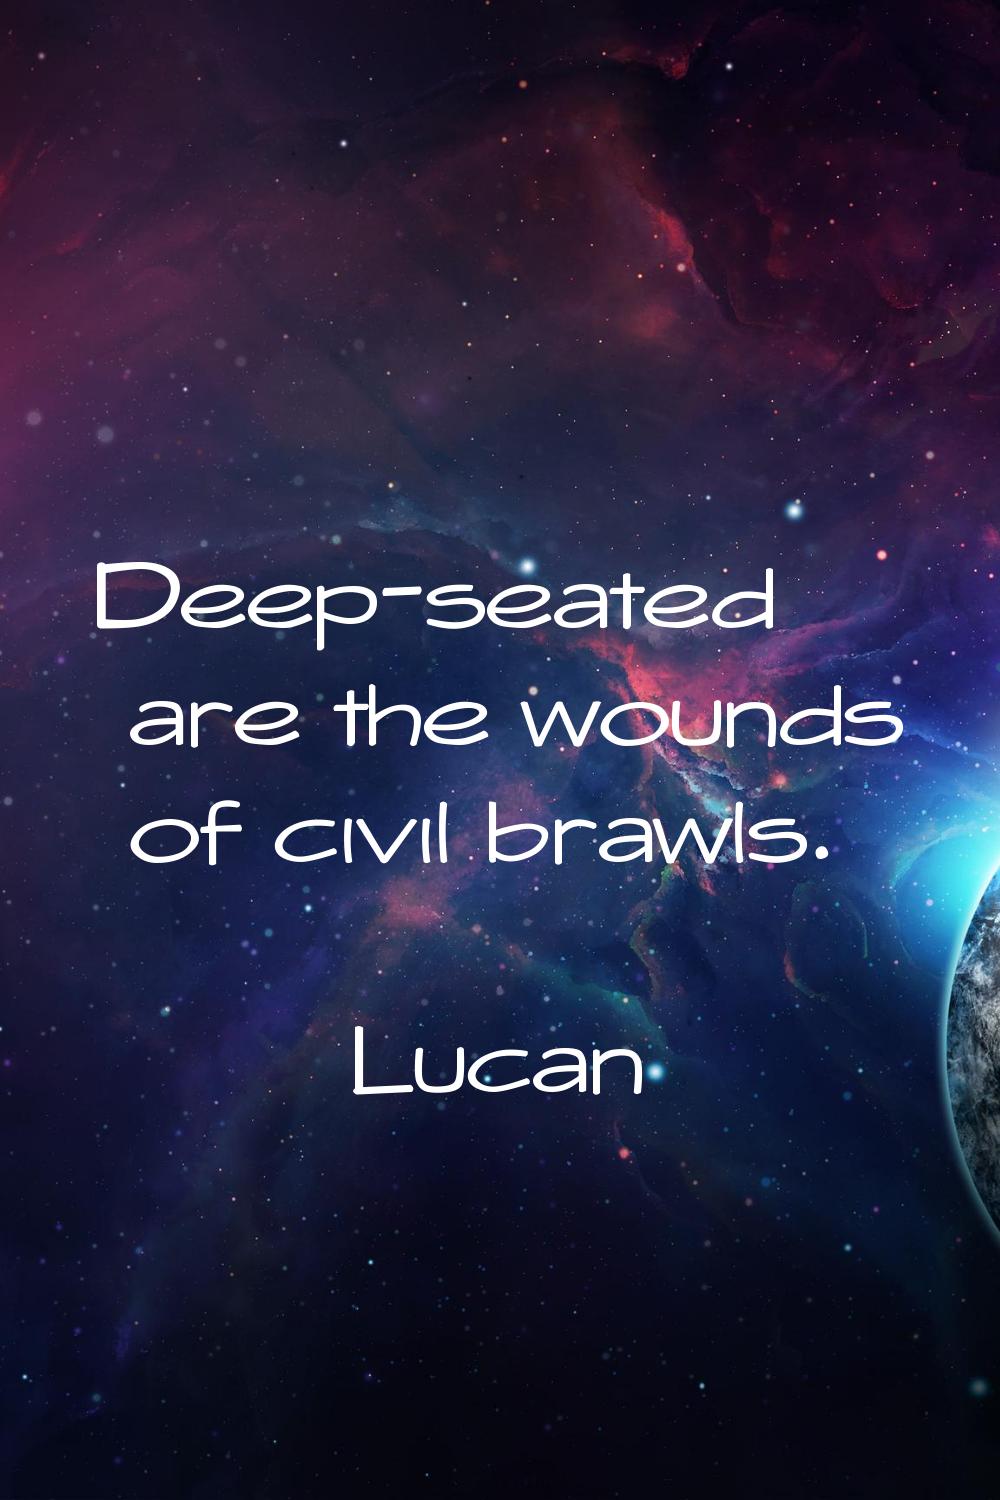 Deep-seated are the wounds of civil brawls.